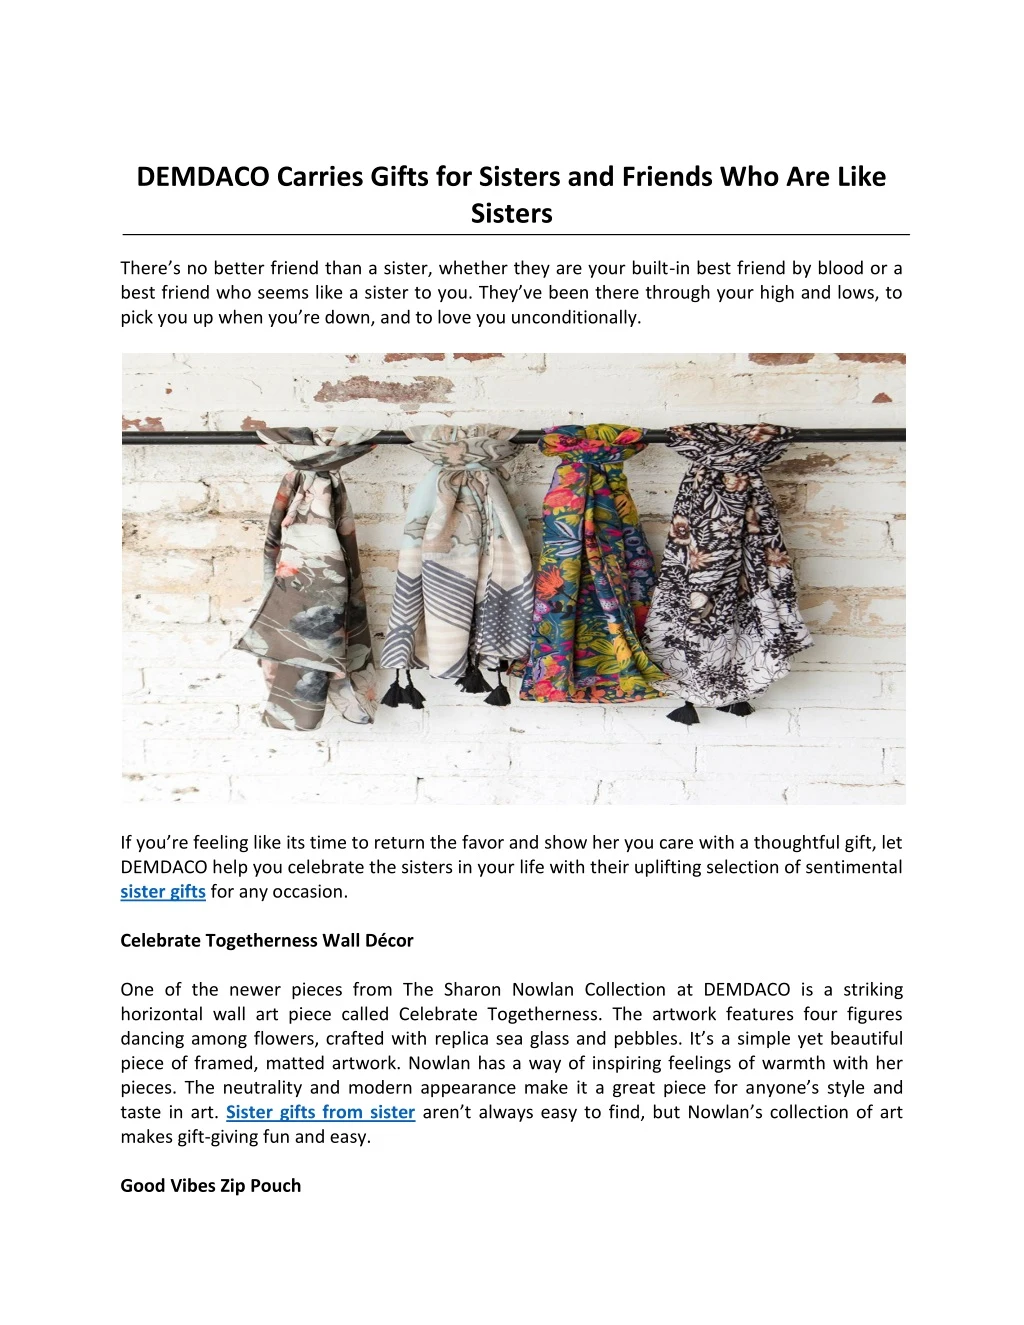 demdaco carries gifts for sisters and friends